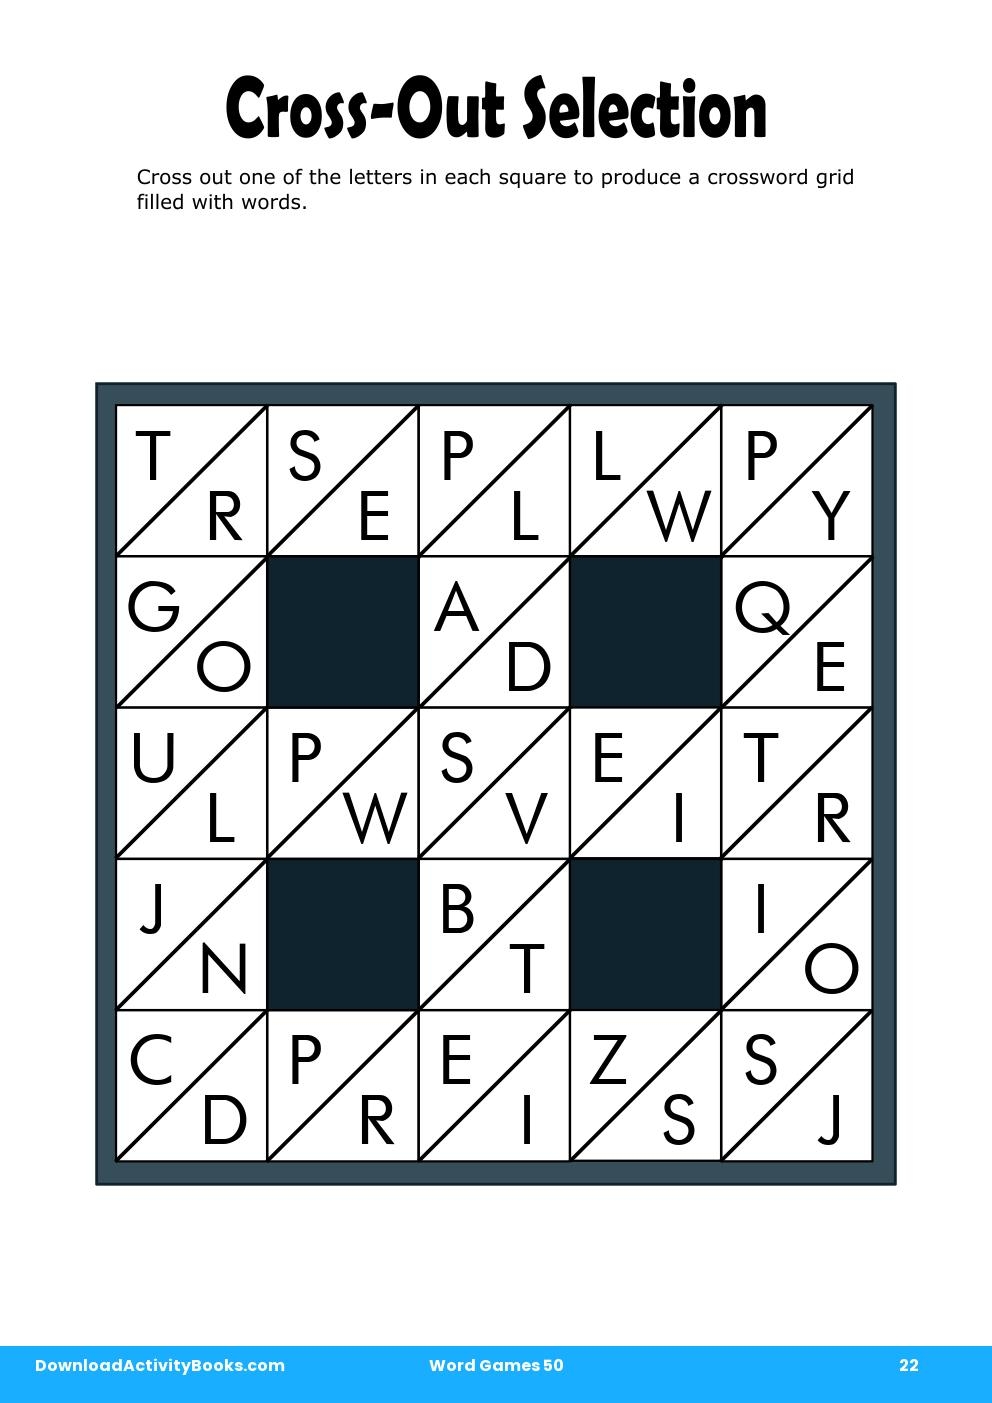 Cross-Out Selection in Word Games 50